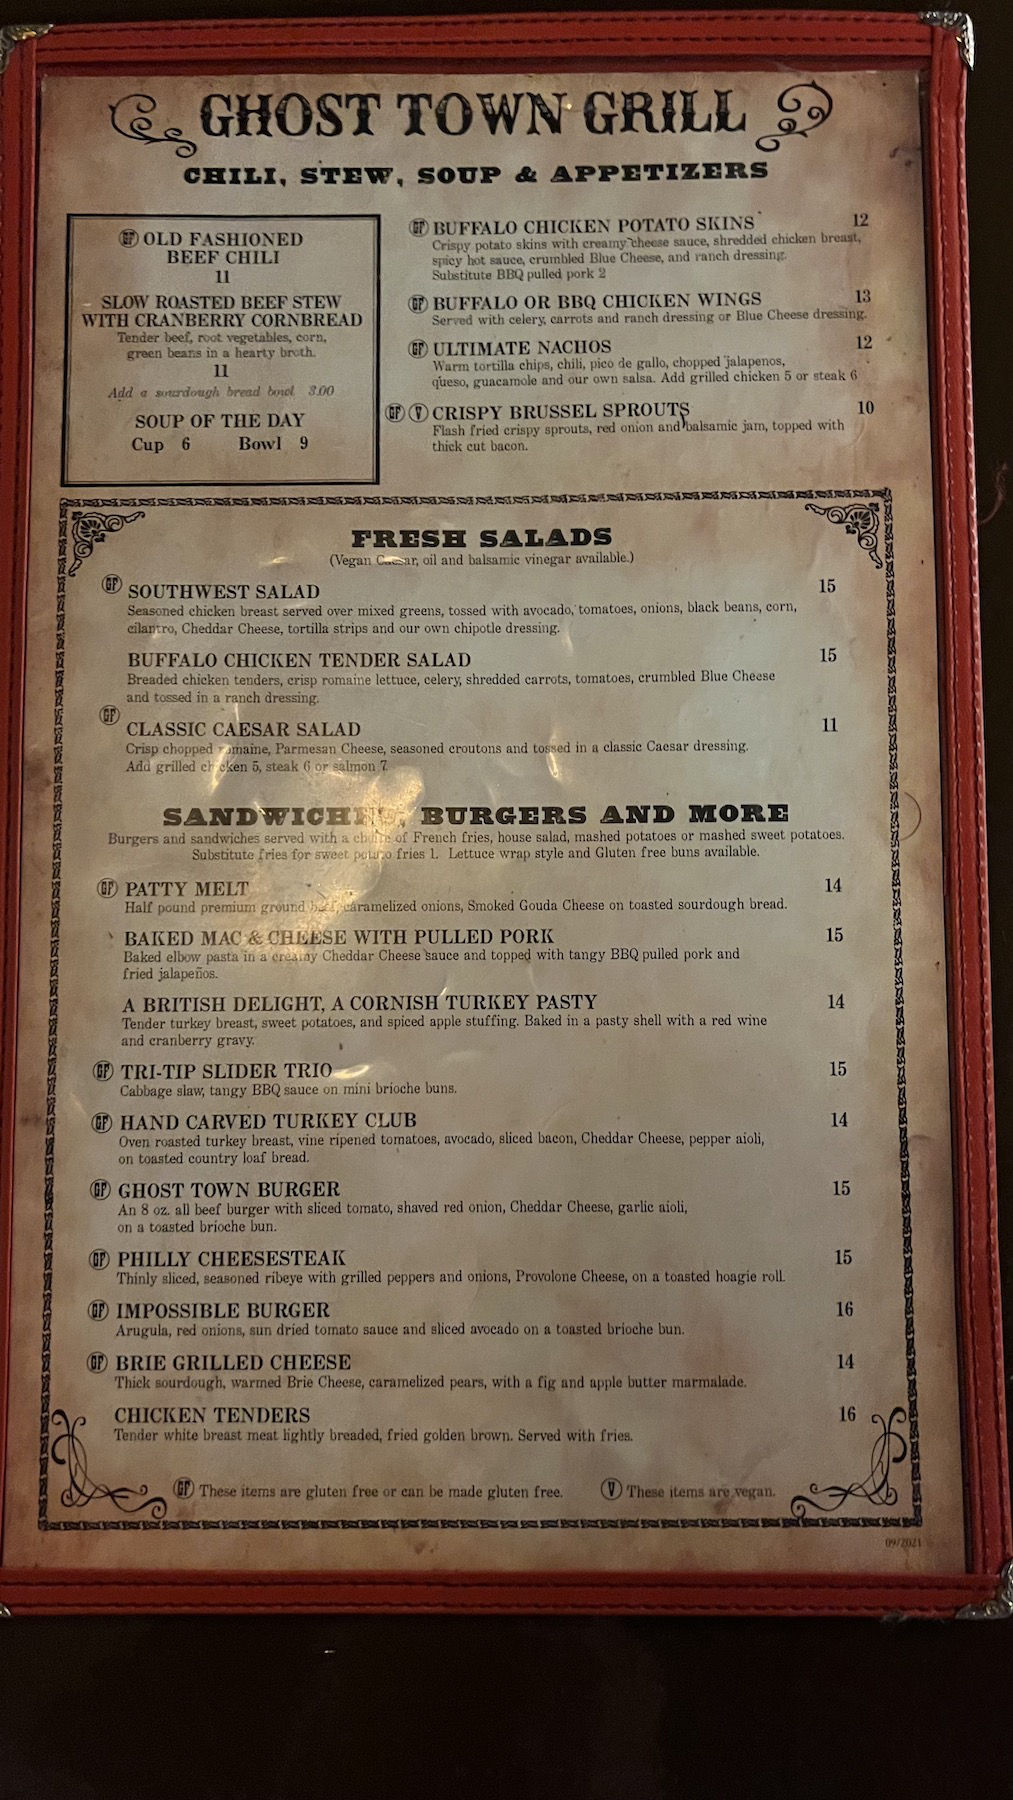 Ghost Town Grill Menu Chili, Stew, Soup, Appetizers